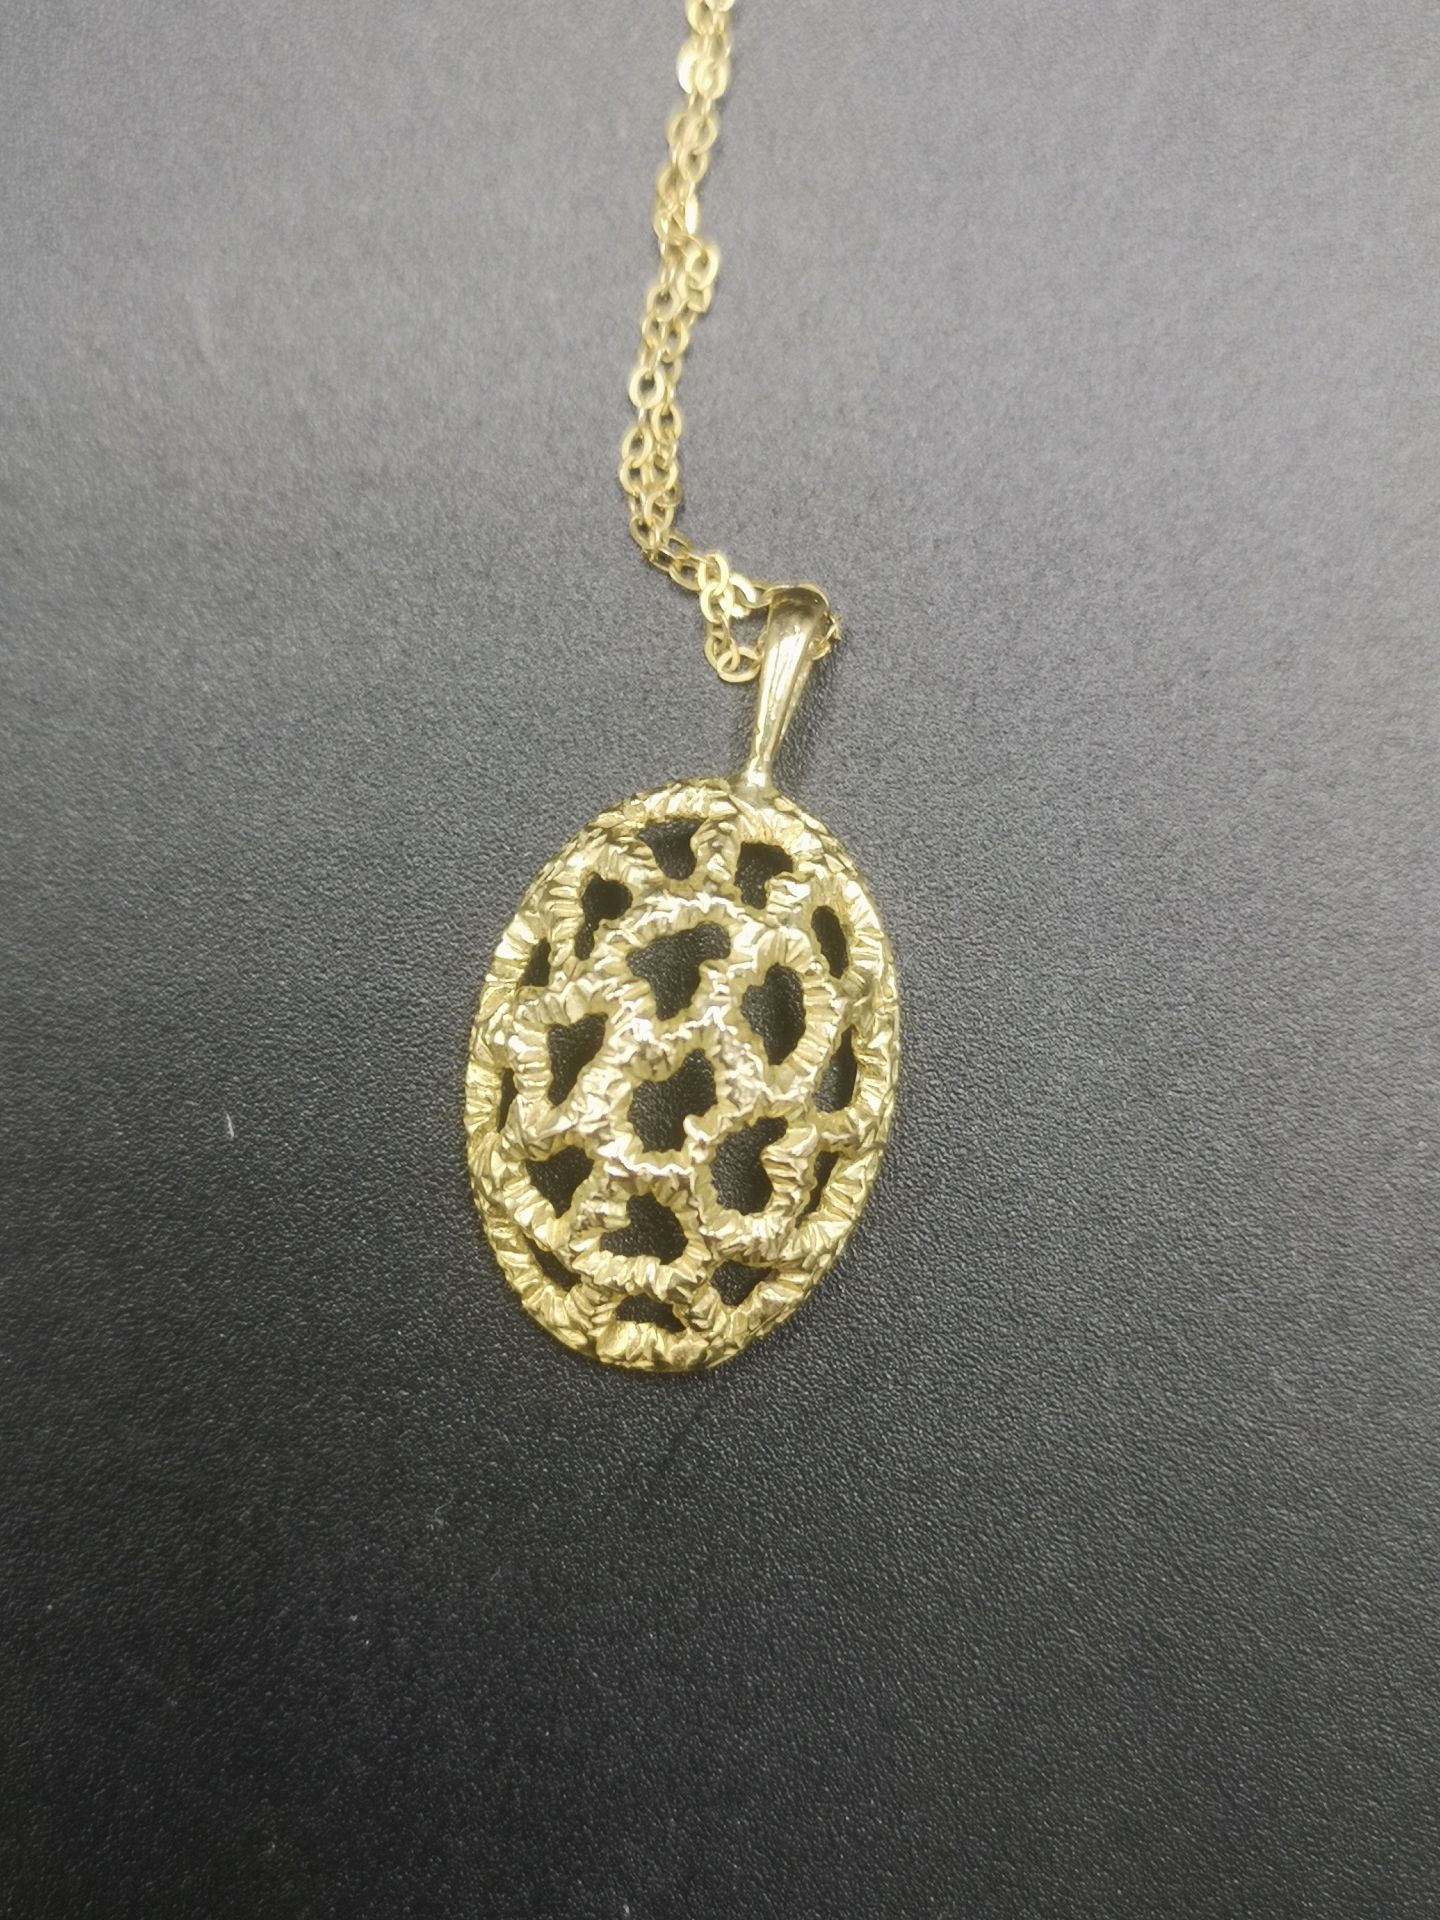 9ct gold necklace and pendant